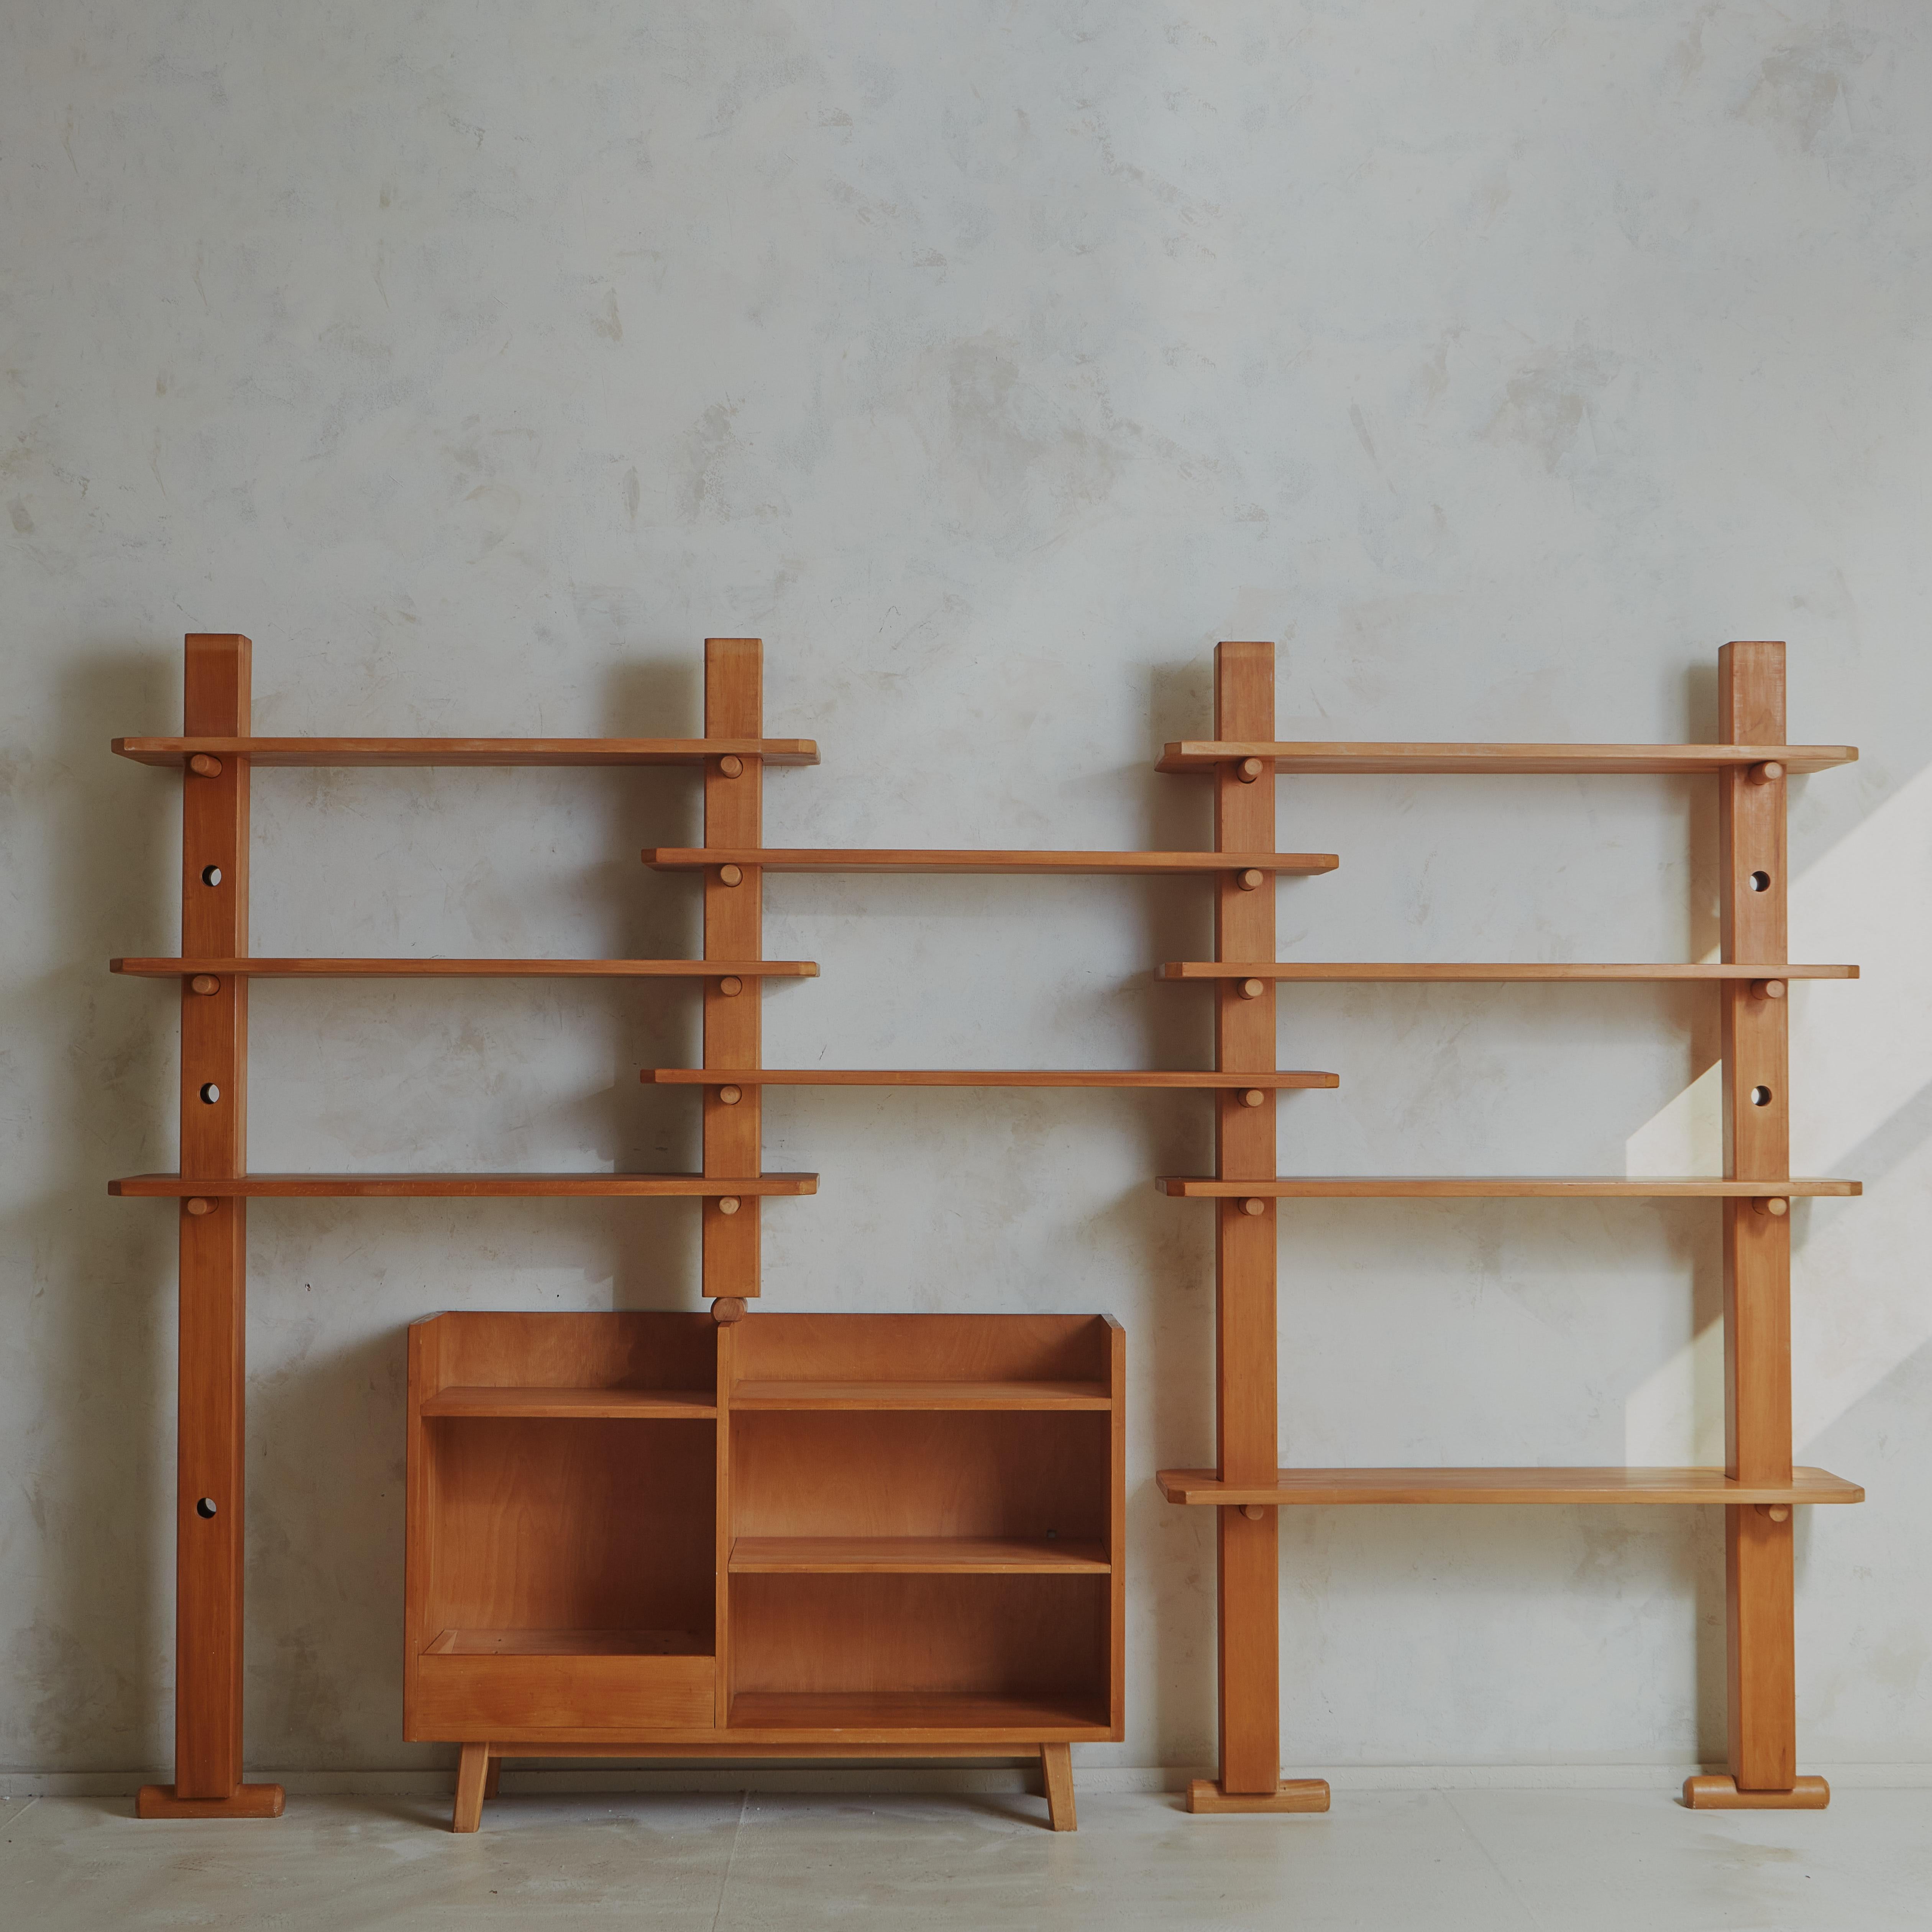 A stunning Mid Century etagere constructed with varnished sycamore wood. This modular unit features three shelving modules and a central built-in console. The shelves are supported by circular pegs, which allow them to be rearranged at various